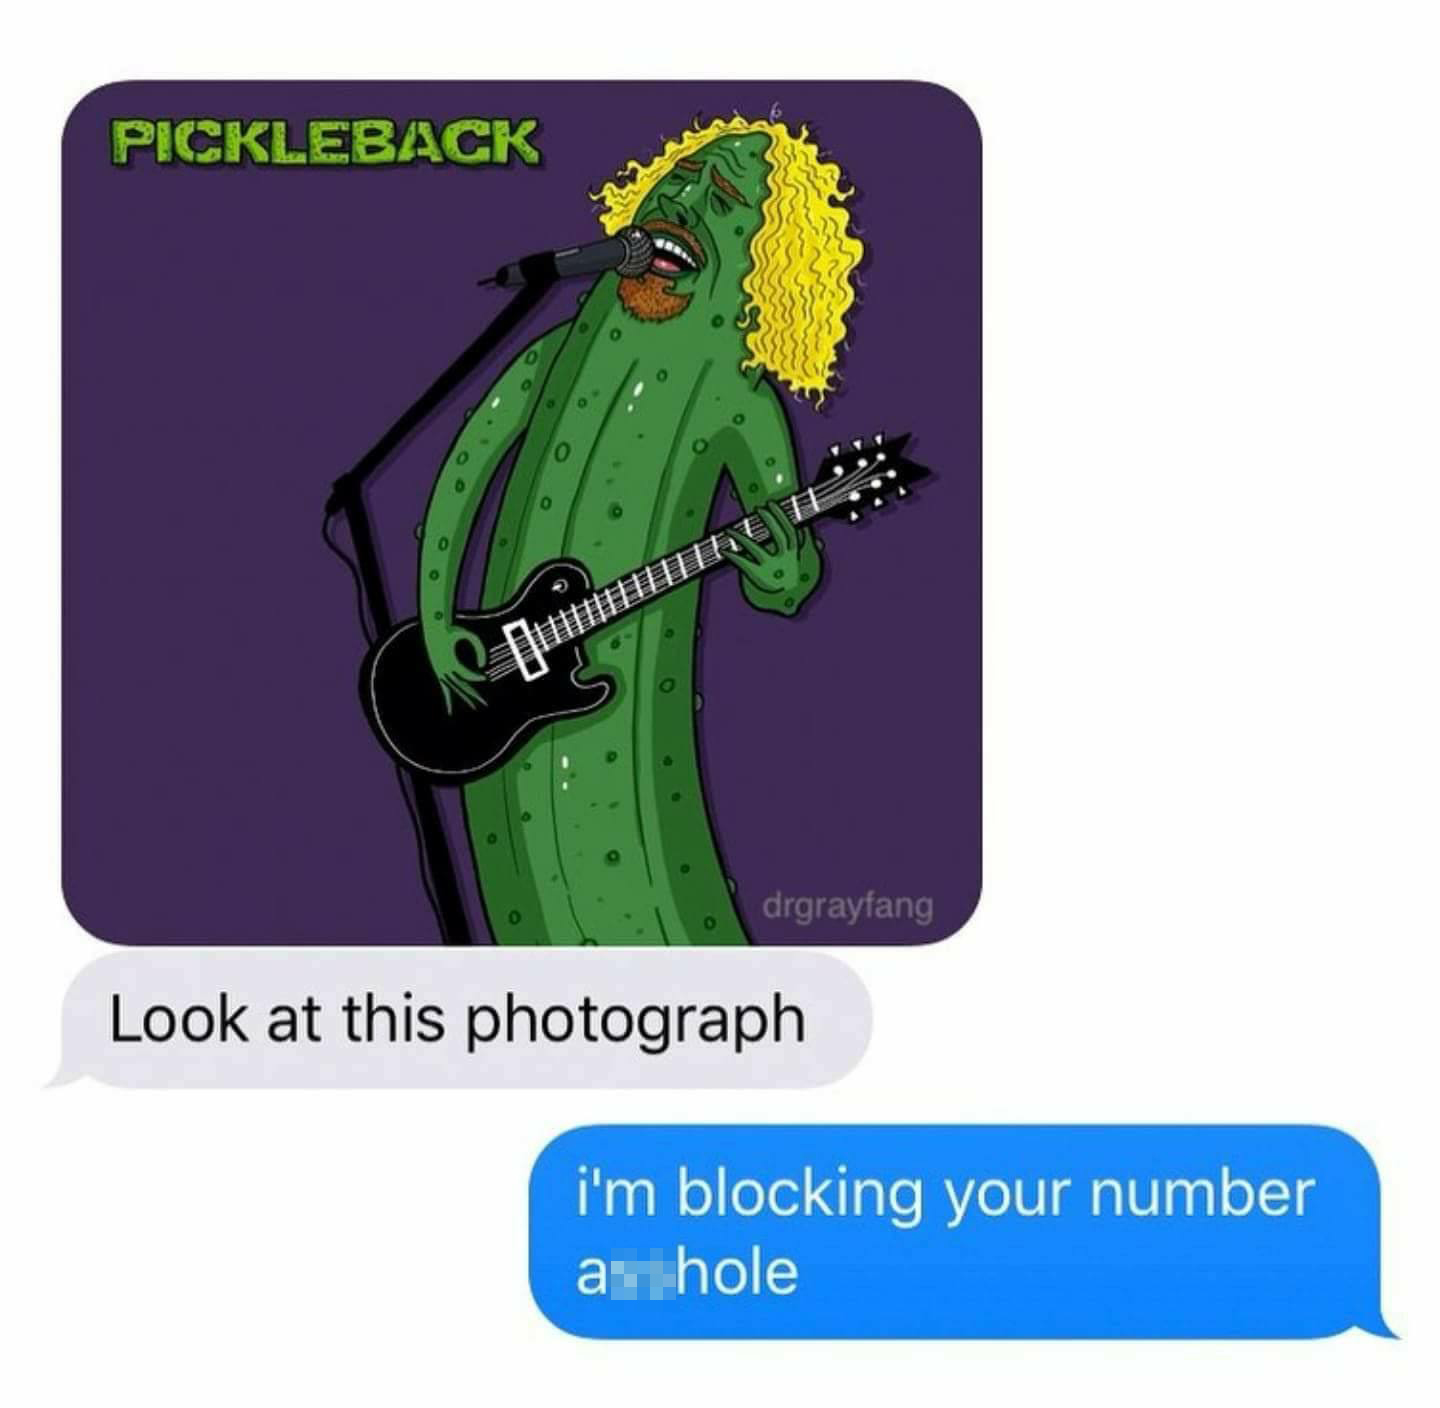 pickleback look at this photograph - Pickleback ht drgrayfang Look at this photograph i'm blocking your number a hole